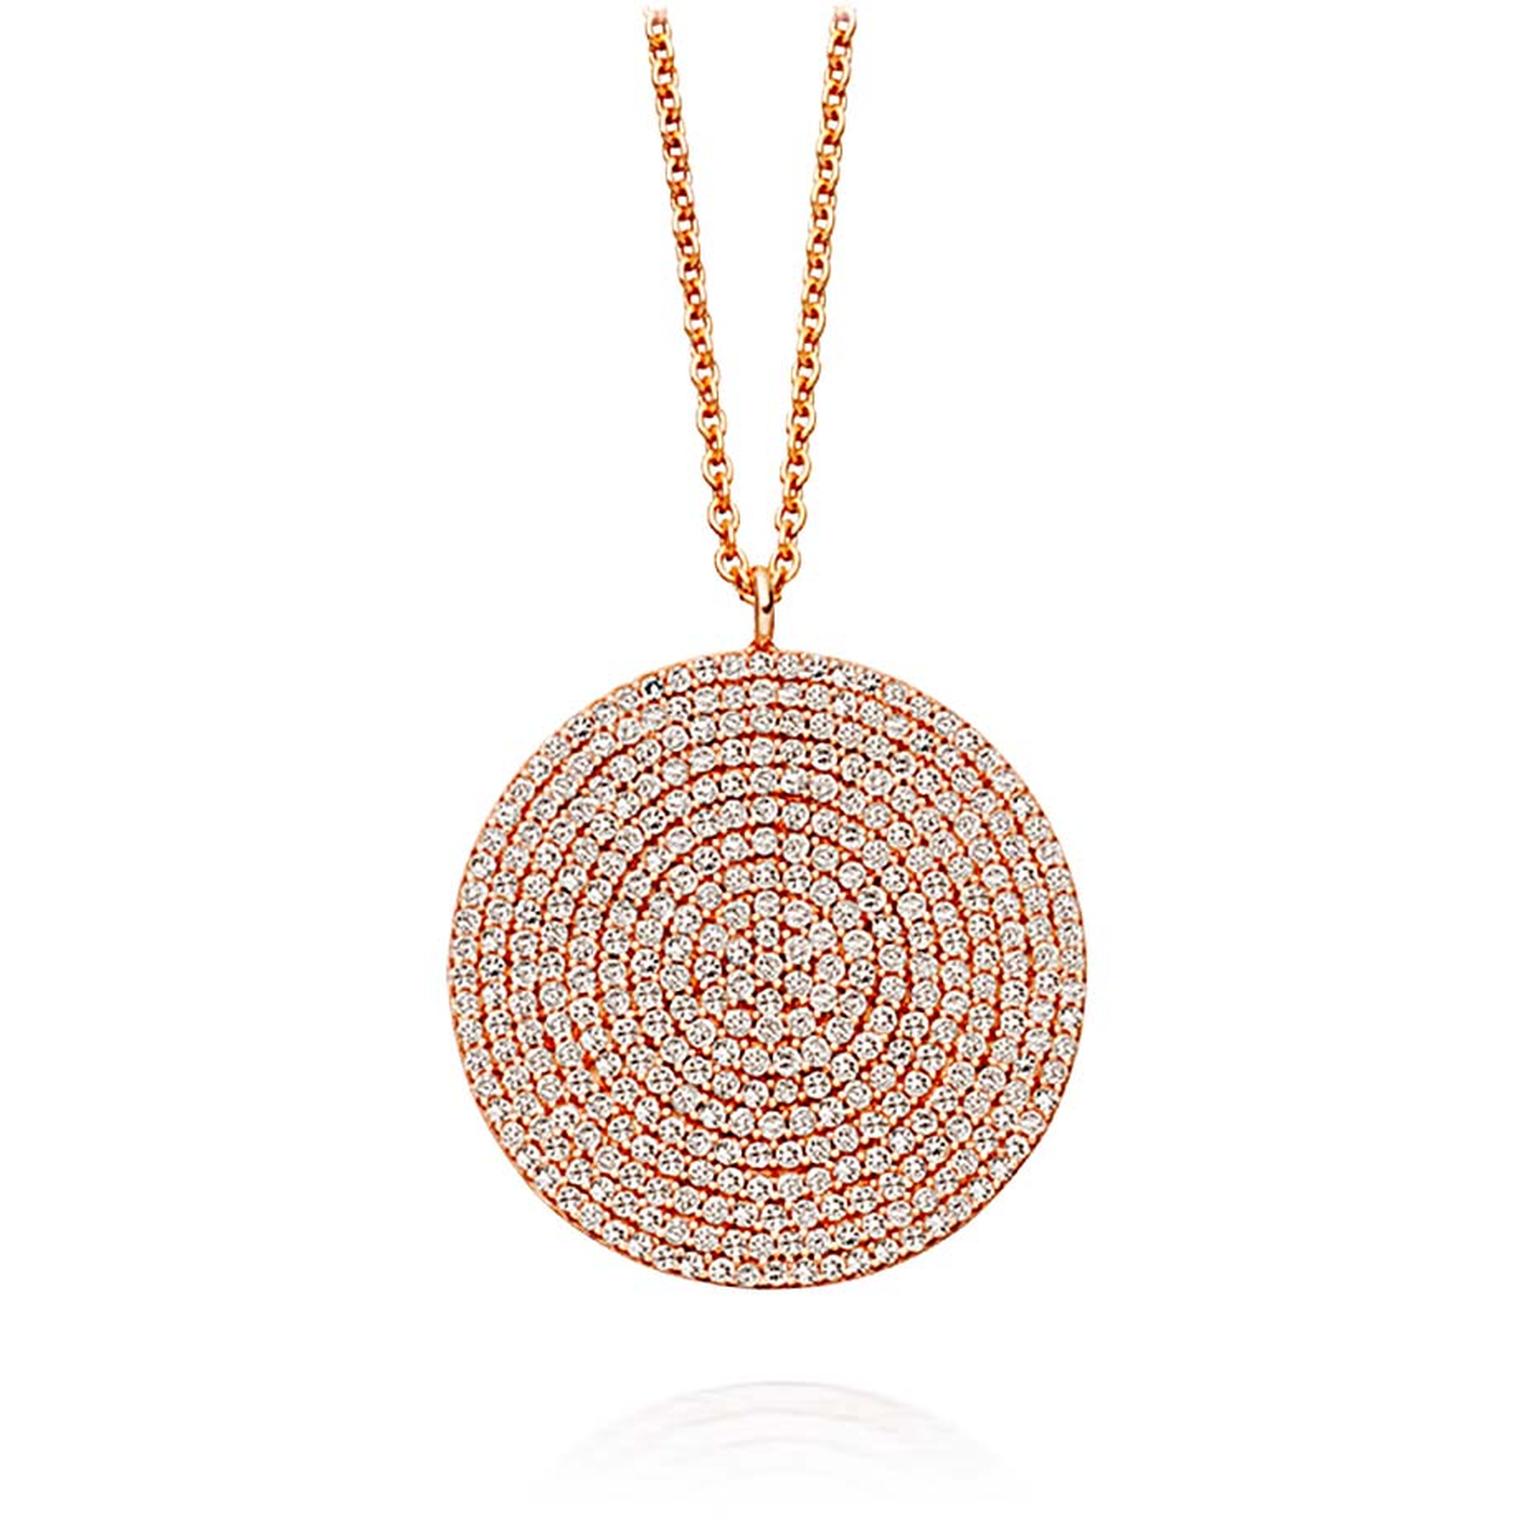 Astley Clarke Muse collection large Icon necklace in rose gold with silver grey diamonds, which has an open setting at the back to enable light to flow through.